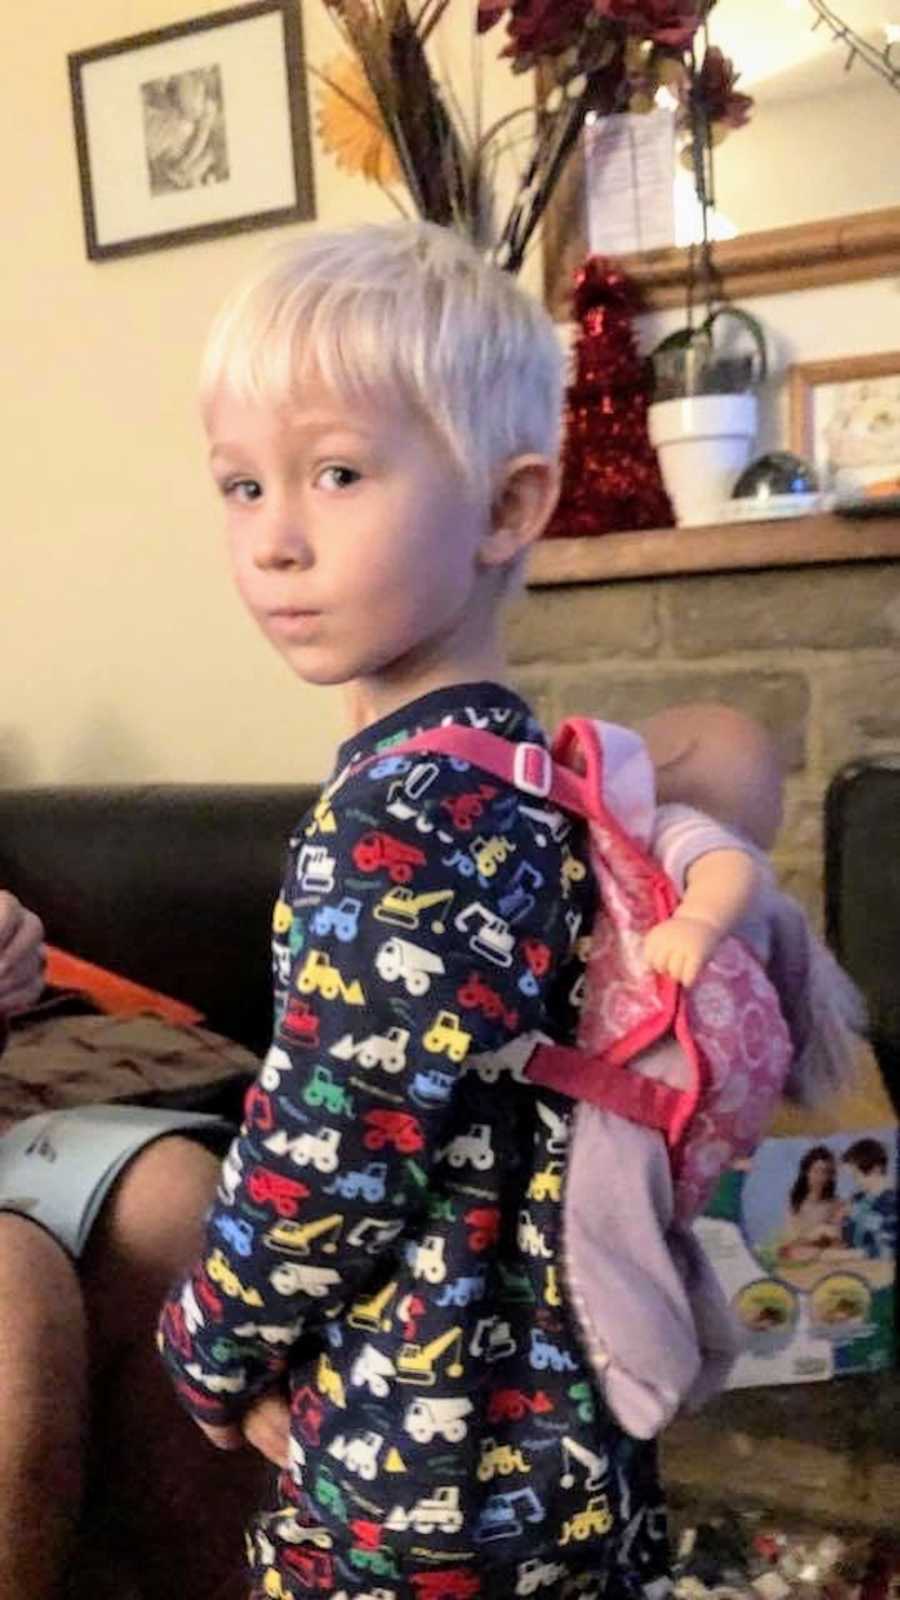 Little boy who still needs to be cuddled to sleep stands in home in pj's with pink backpack on with baby inside it